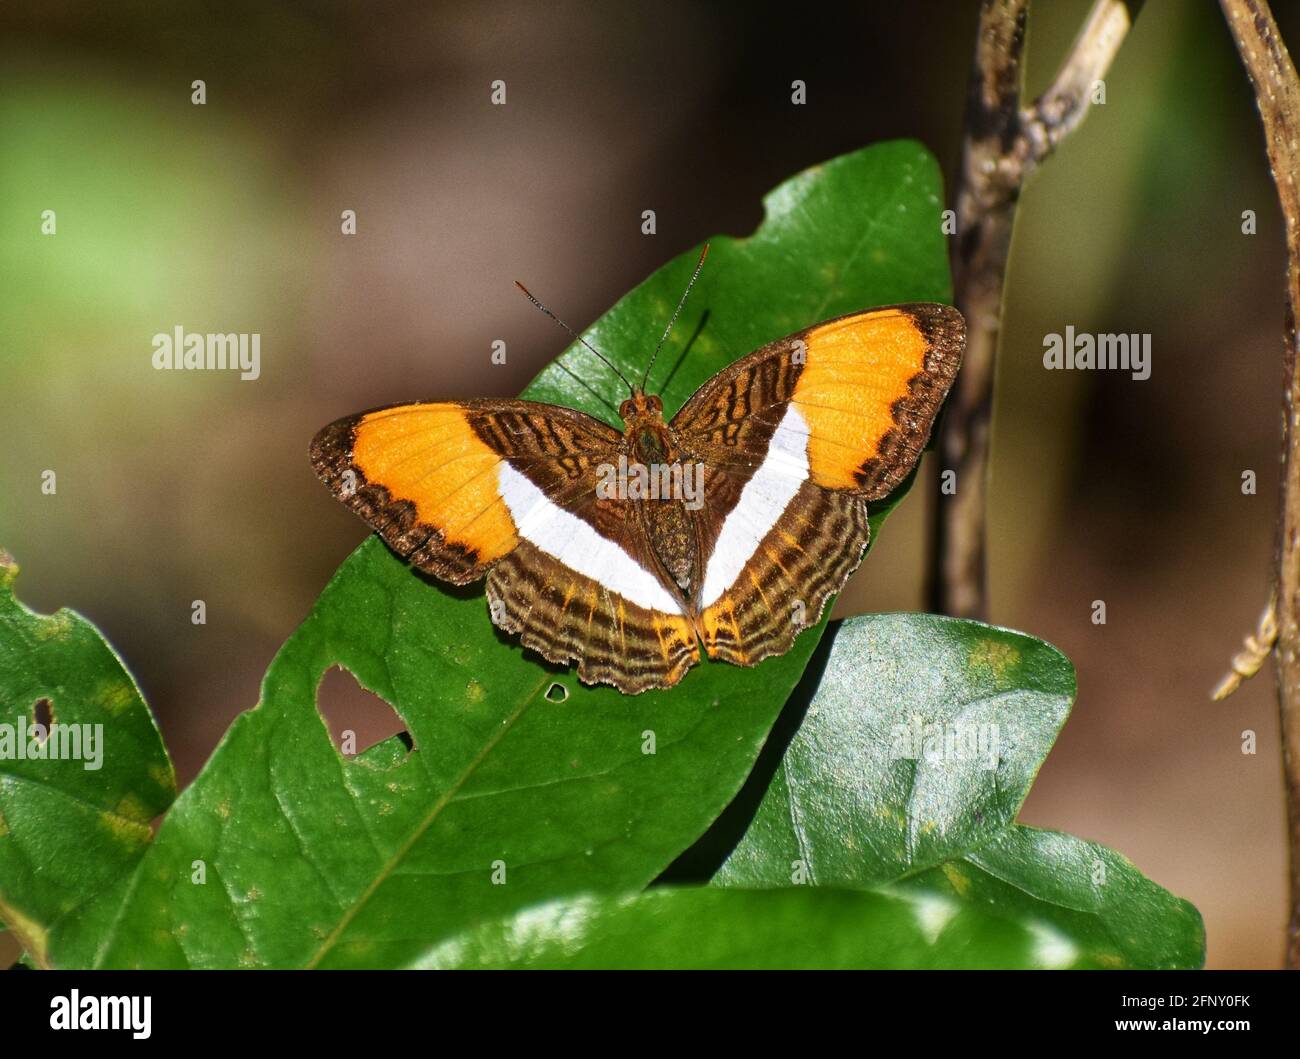 Adelpha cytherea, commonly known as the smooth banded sister butterfly, seen in the Tabaquite forest during the 8th annual Bioblitz in Trinidad. Stock Photo